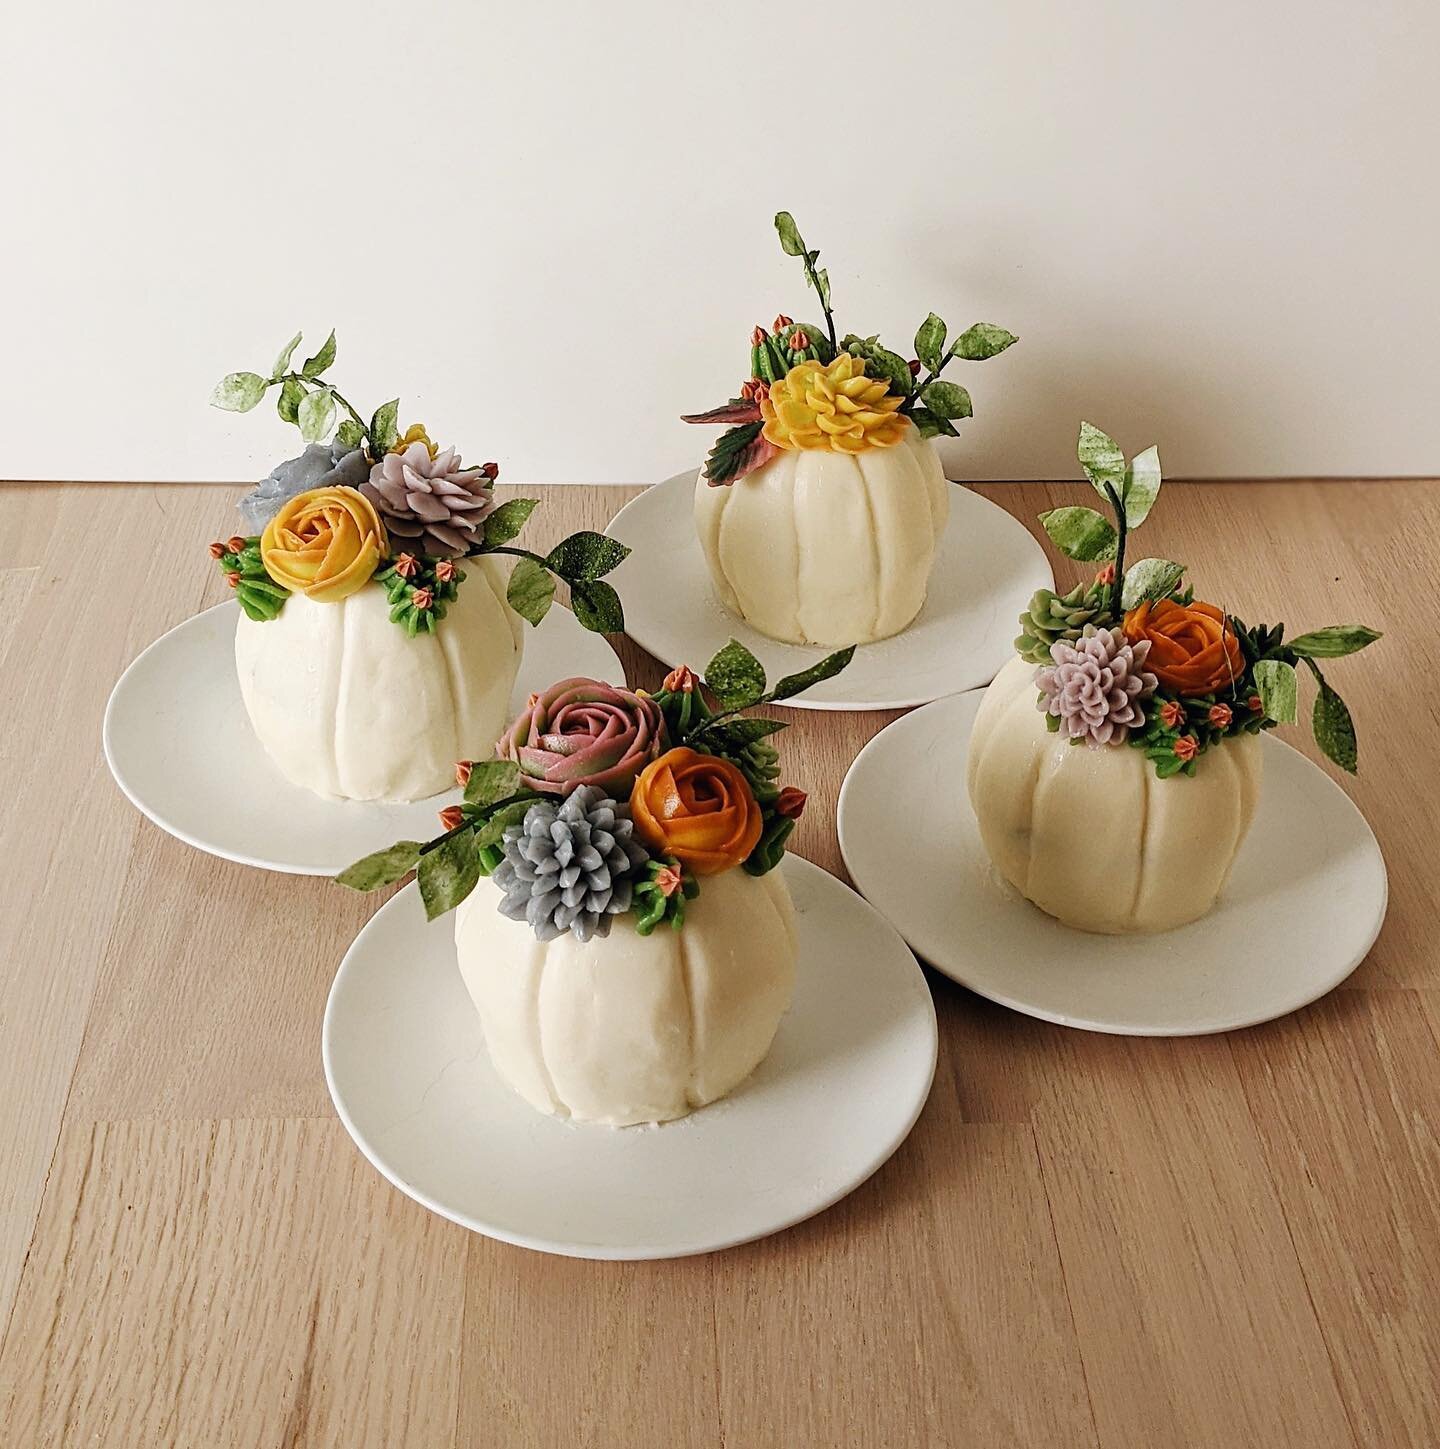 #waybackwednesday these pumpkin cake centerpieces with buttercream succulents and wafer paper leaves from last fall - see how i made them in my &ldquo;🎃cakes&rdquo; highlight 🍁 I can&rsquo;t believe it&rsquo;s already December! With a newborn in to